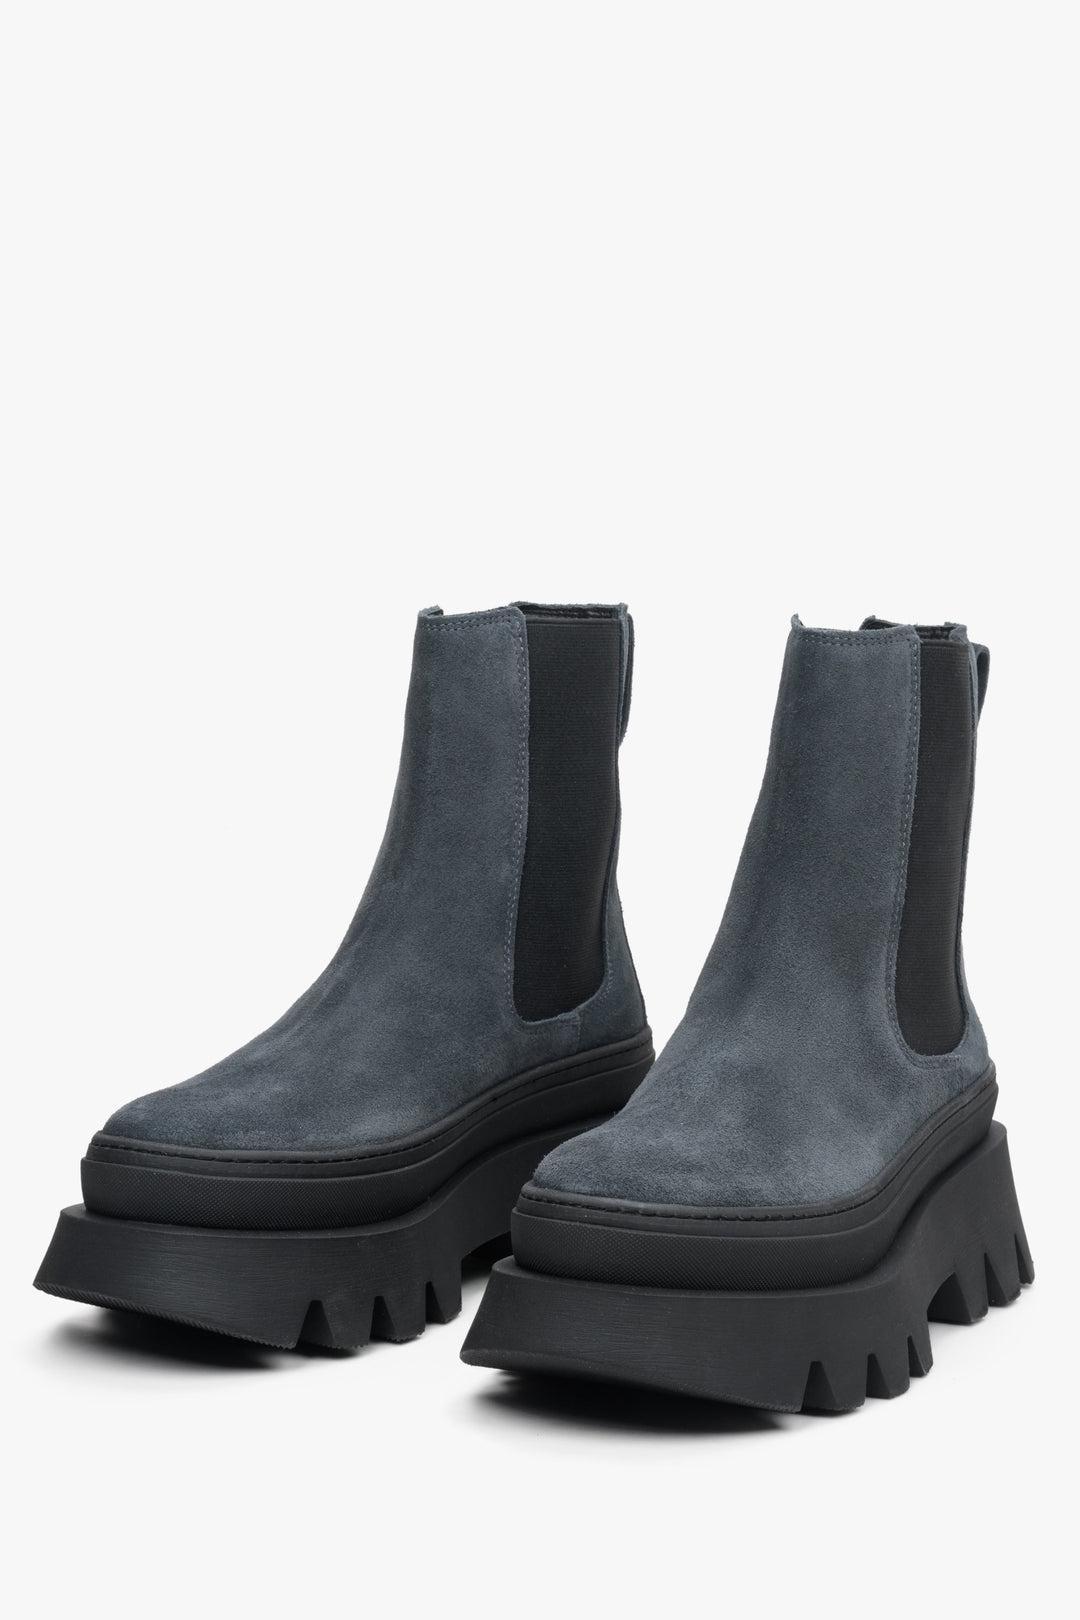 Women's grey platform chelsea boots by Estro - close-up on the toe.